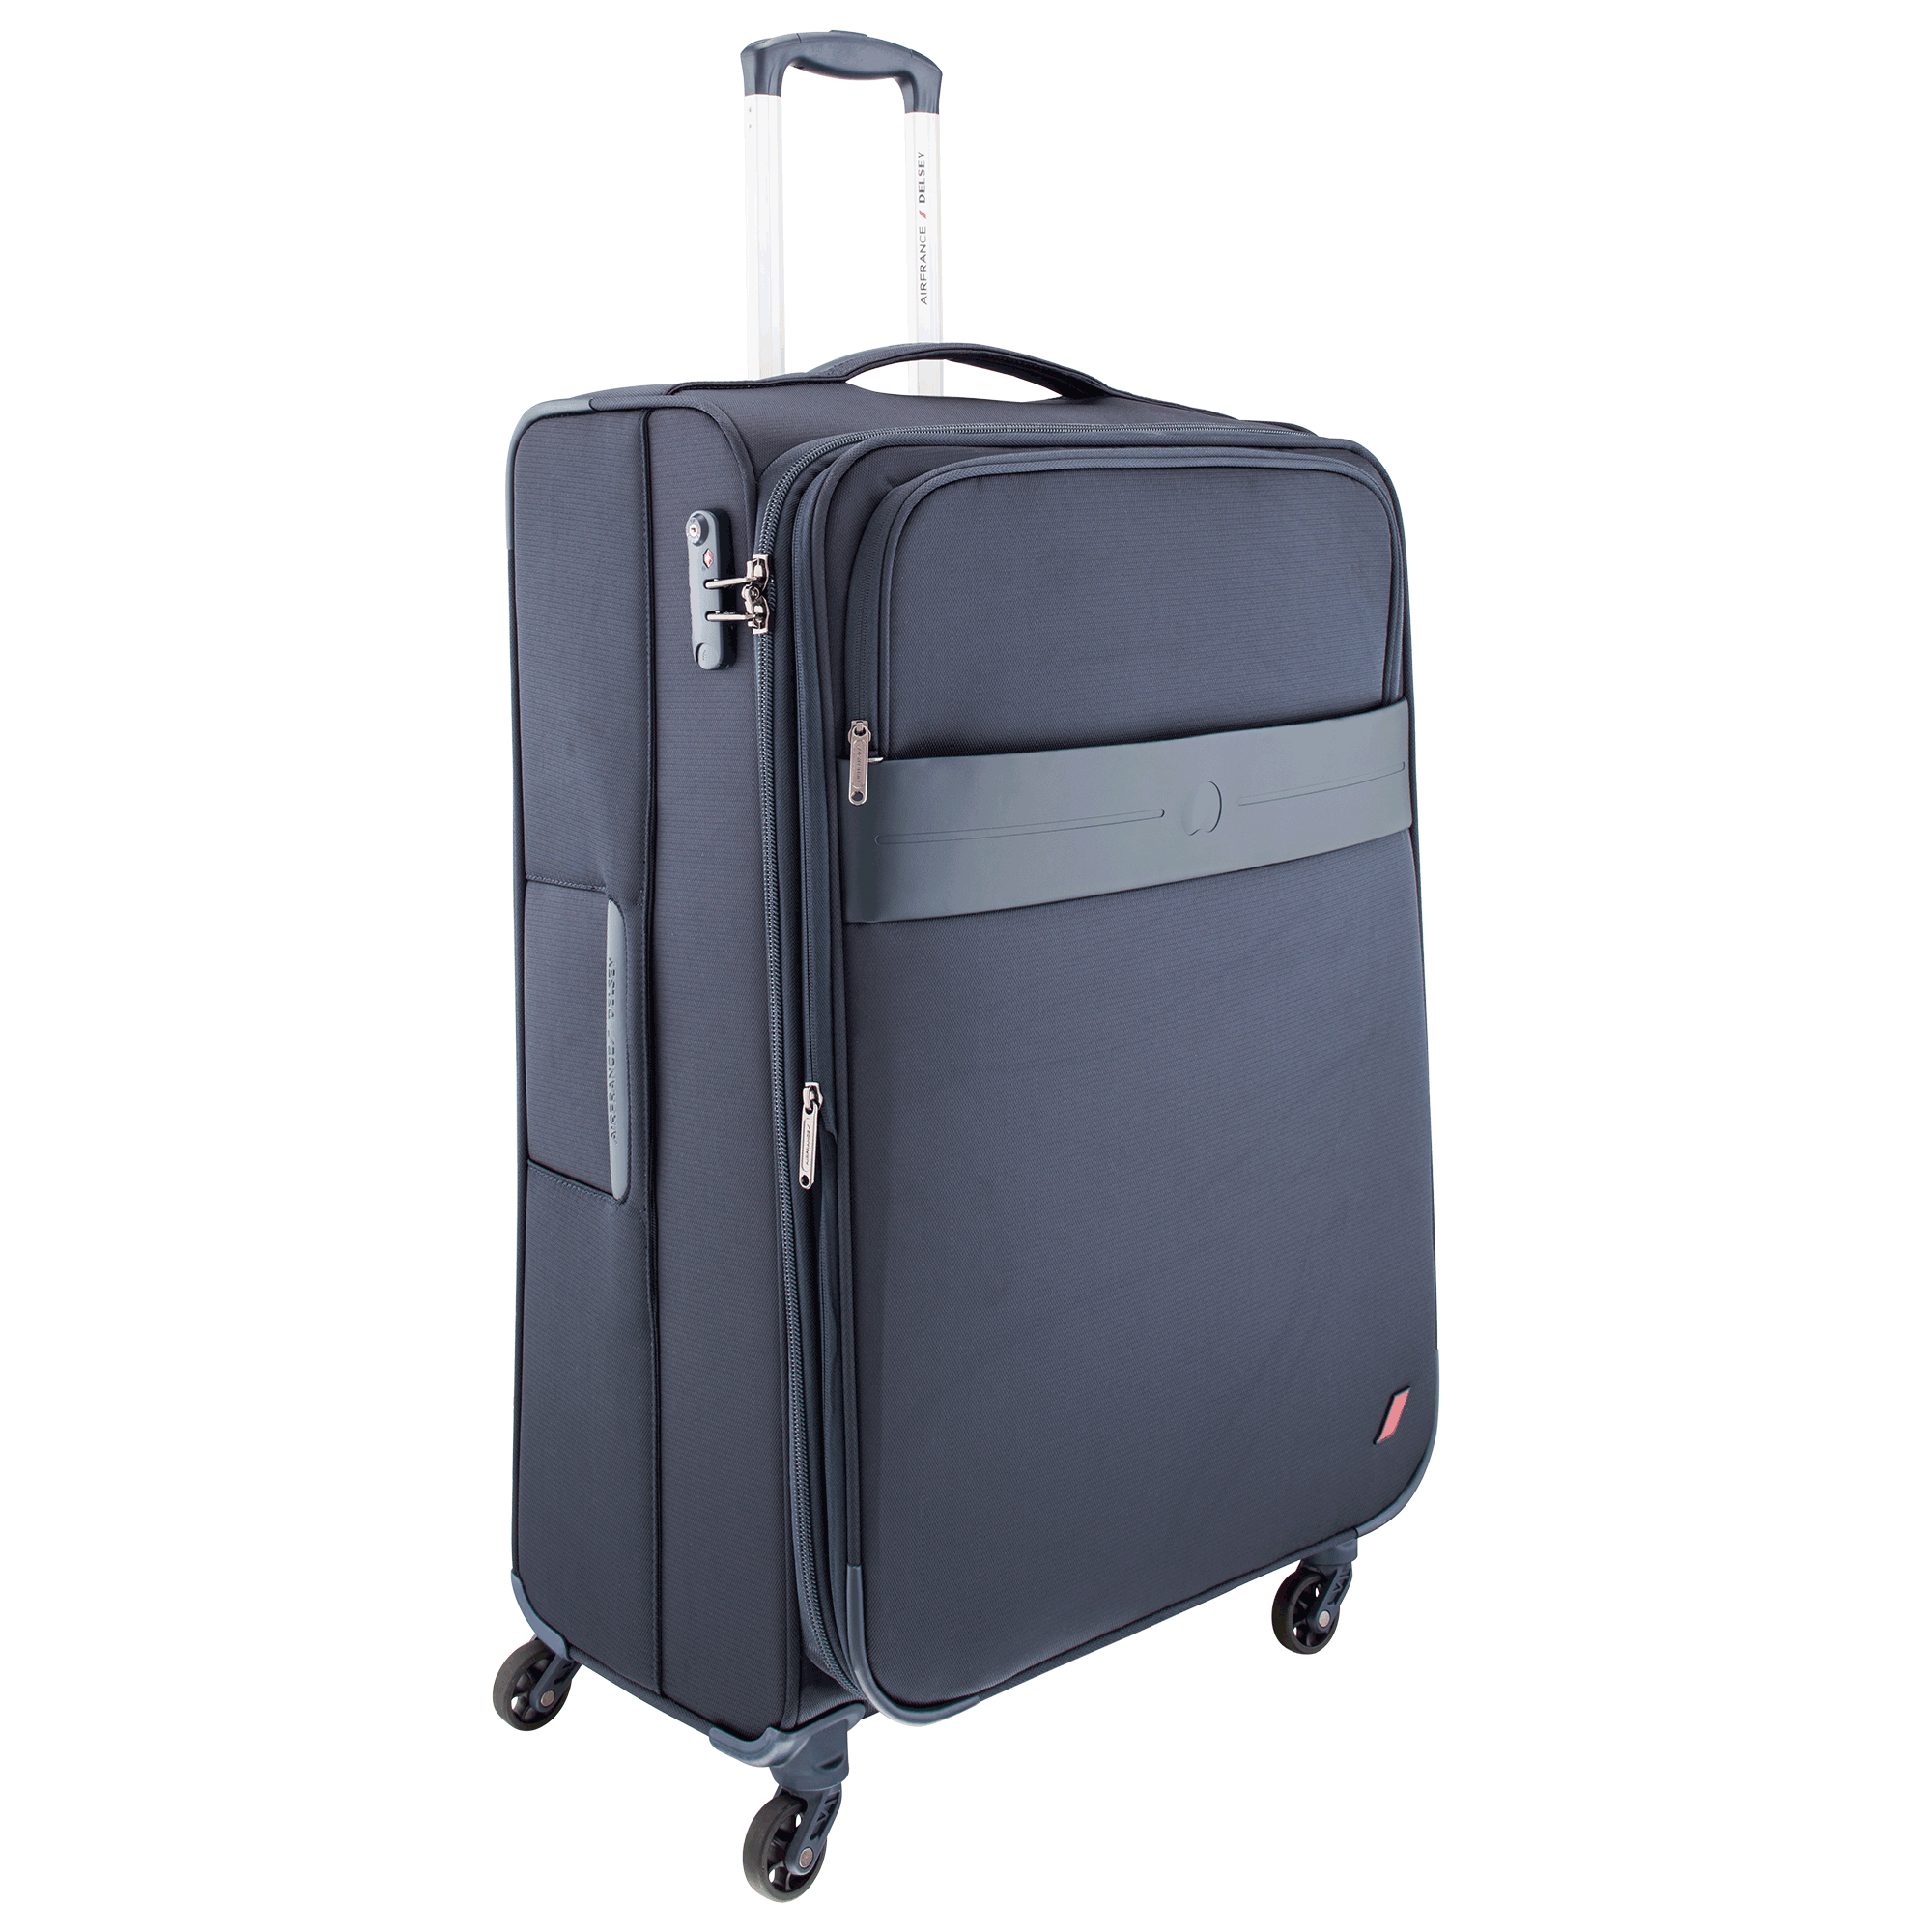 Suitcase PNG - 2545